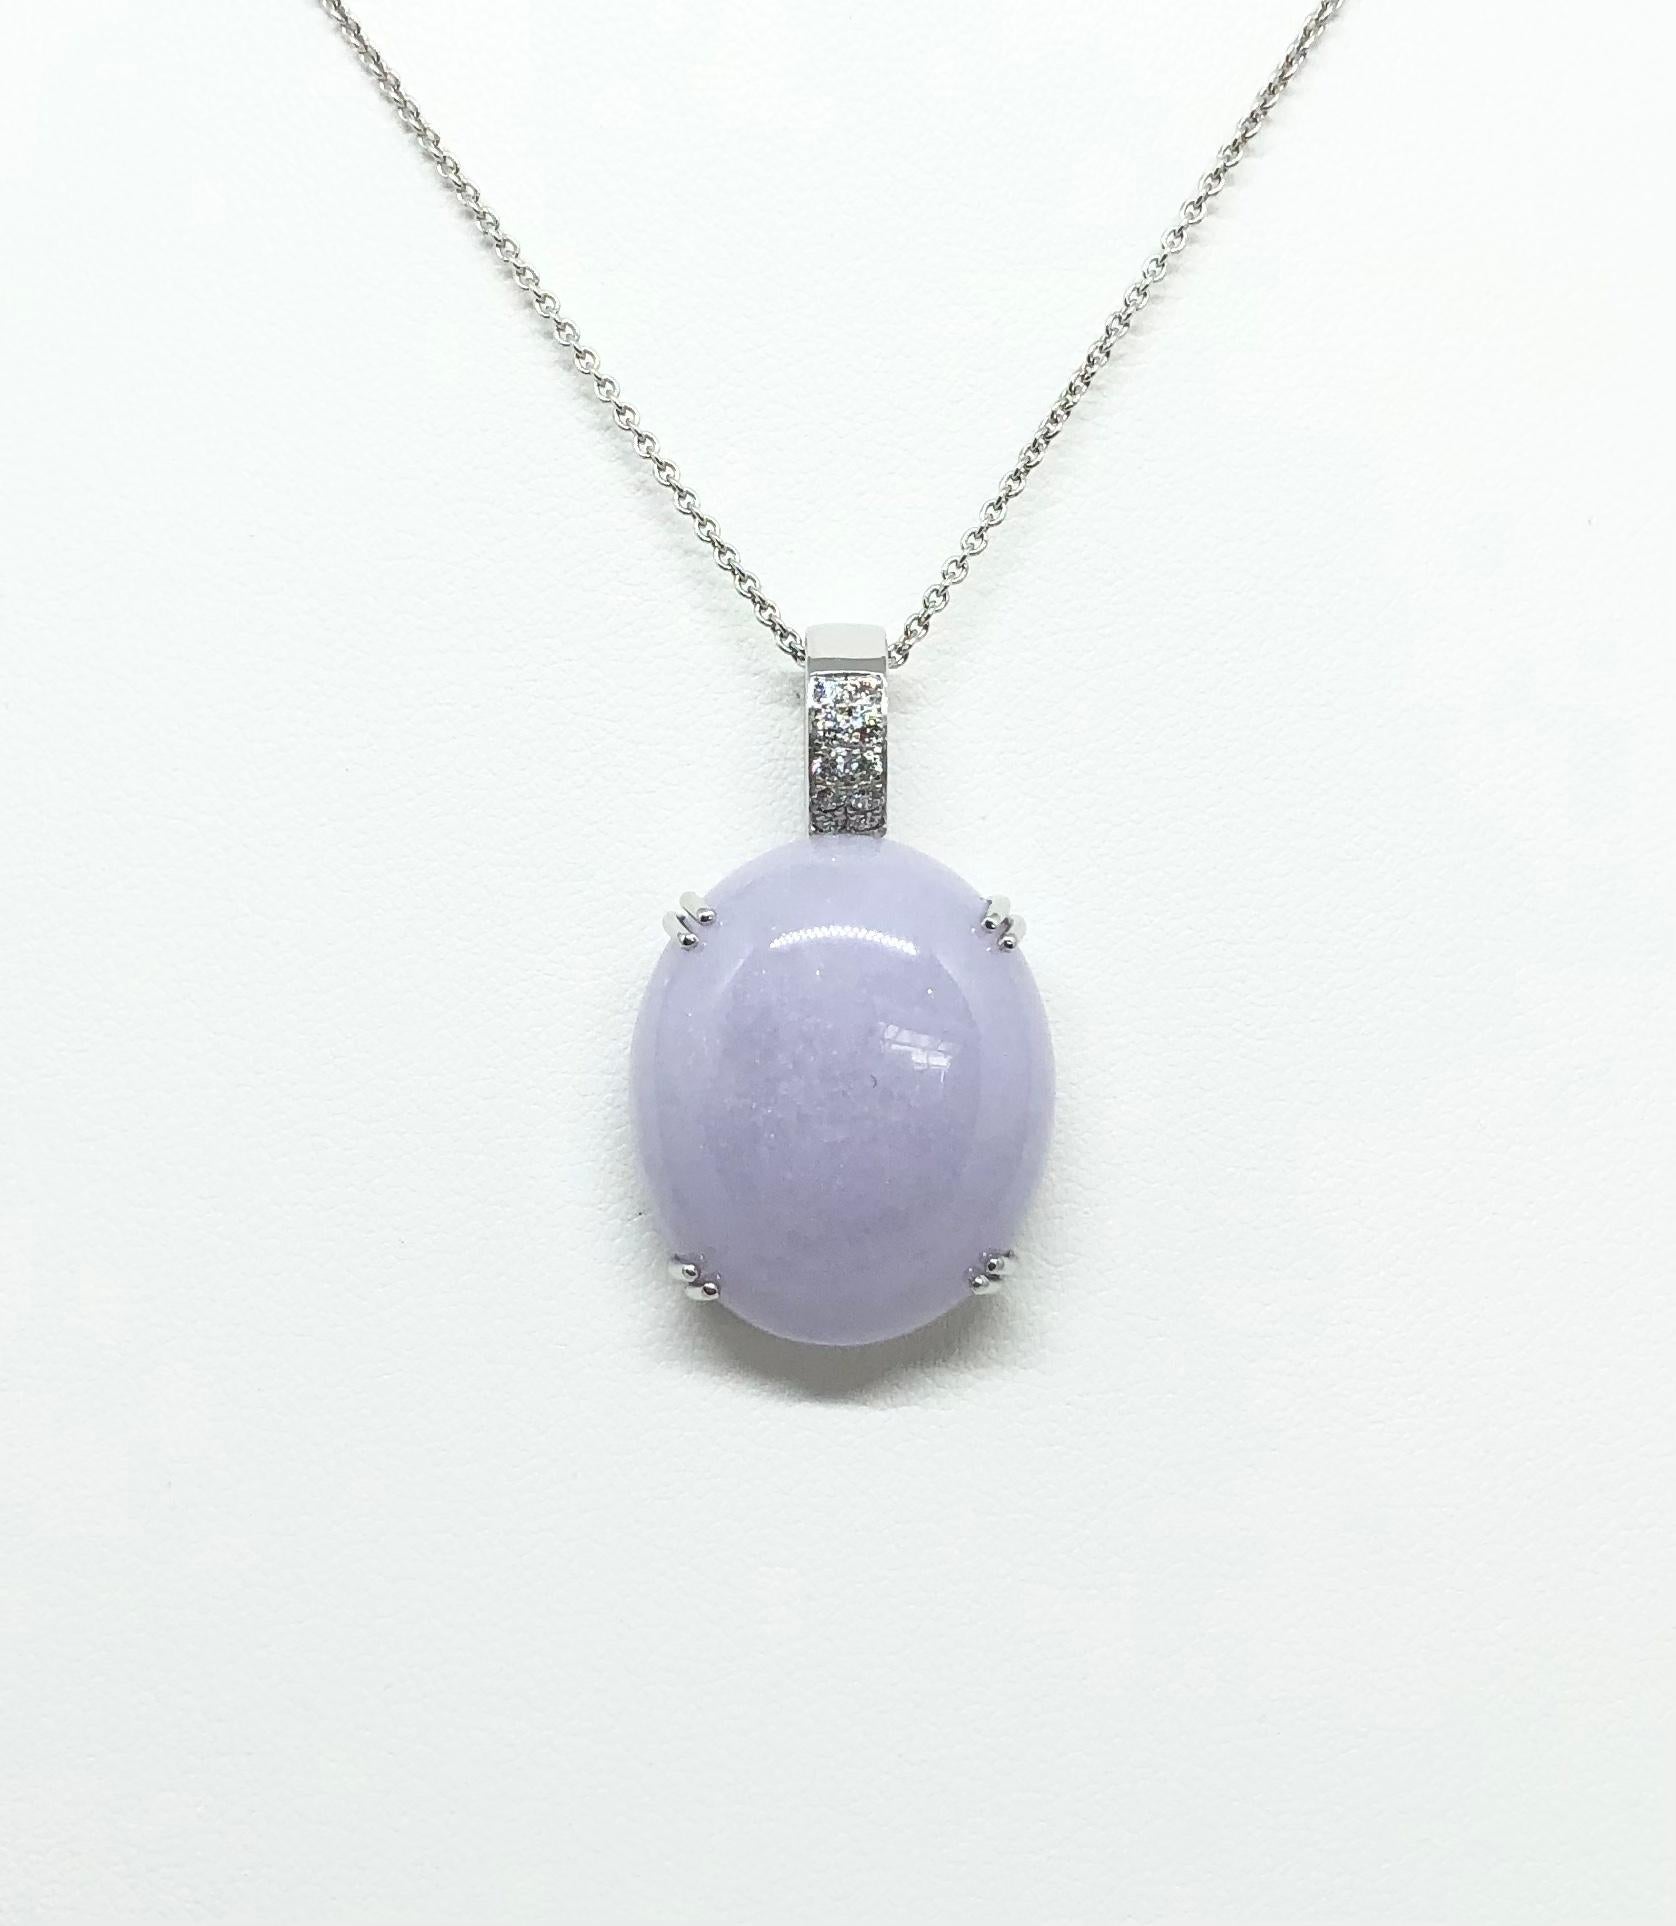 Lavender Jade 37.19 carats with Diamond 0.12 carat Pendant set in 18 Karat White Gold Settings
(chain not included)

Width: 2.0 cm 
Length: 3.3 cm
Total Weight: 11.36 grams

